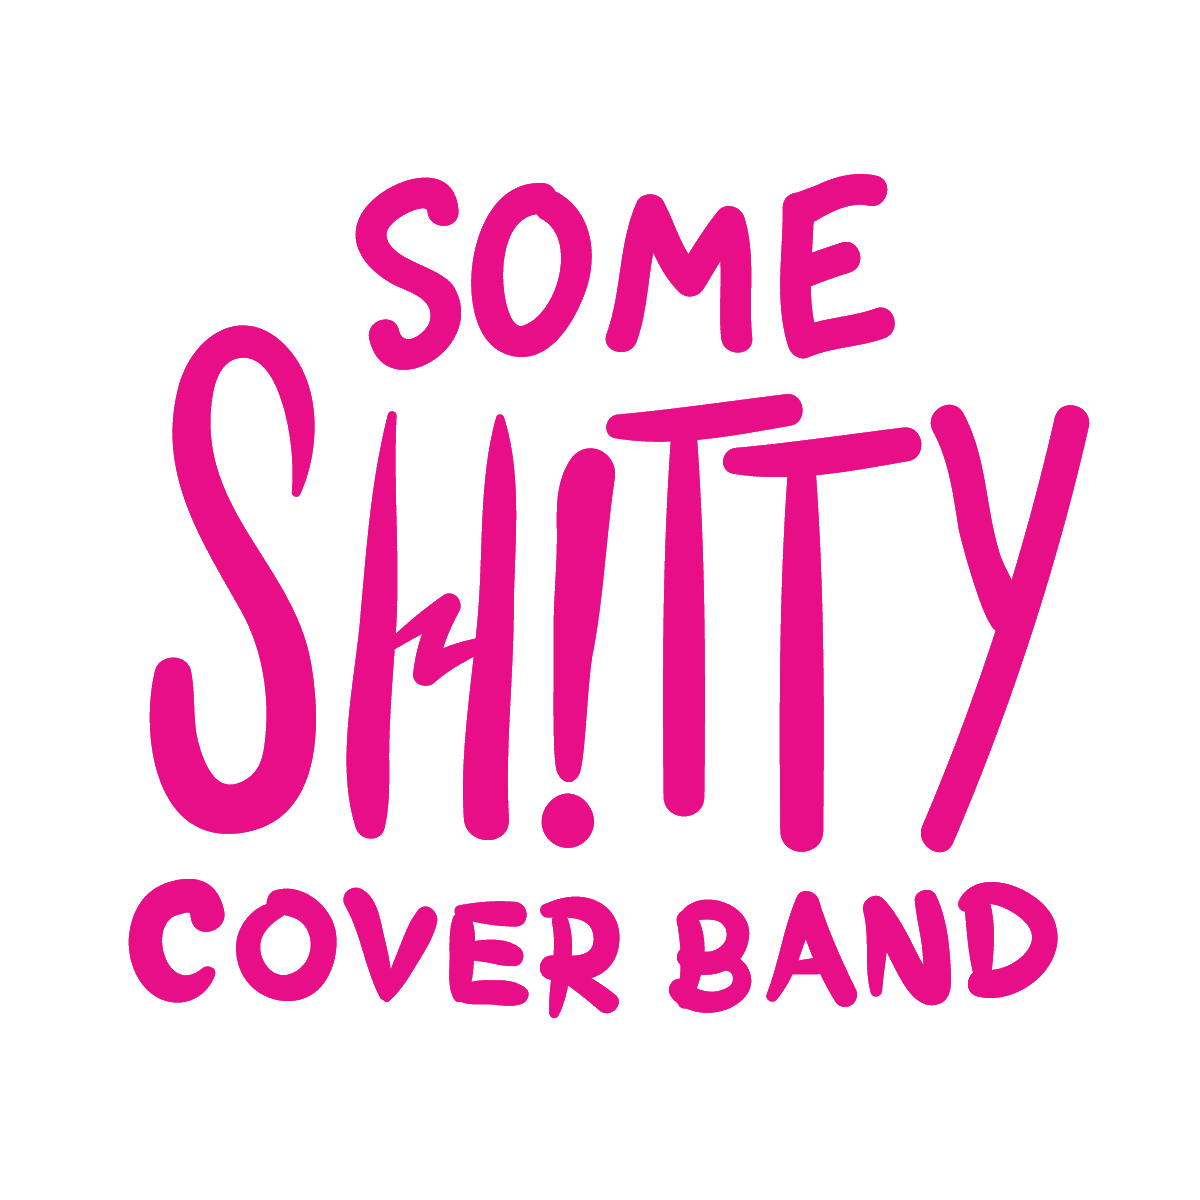 Some Shitty Cover Band